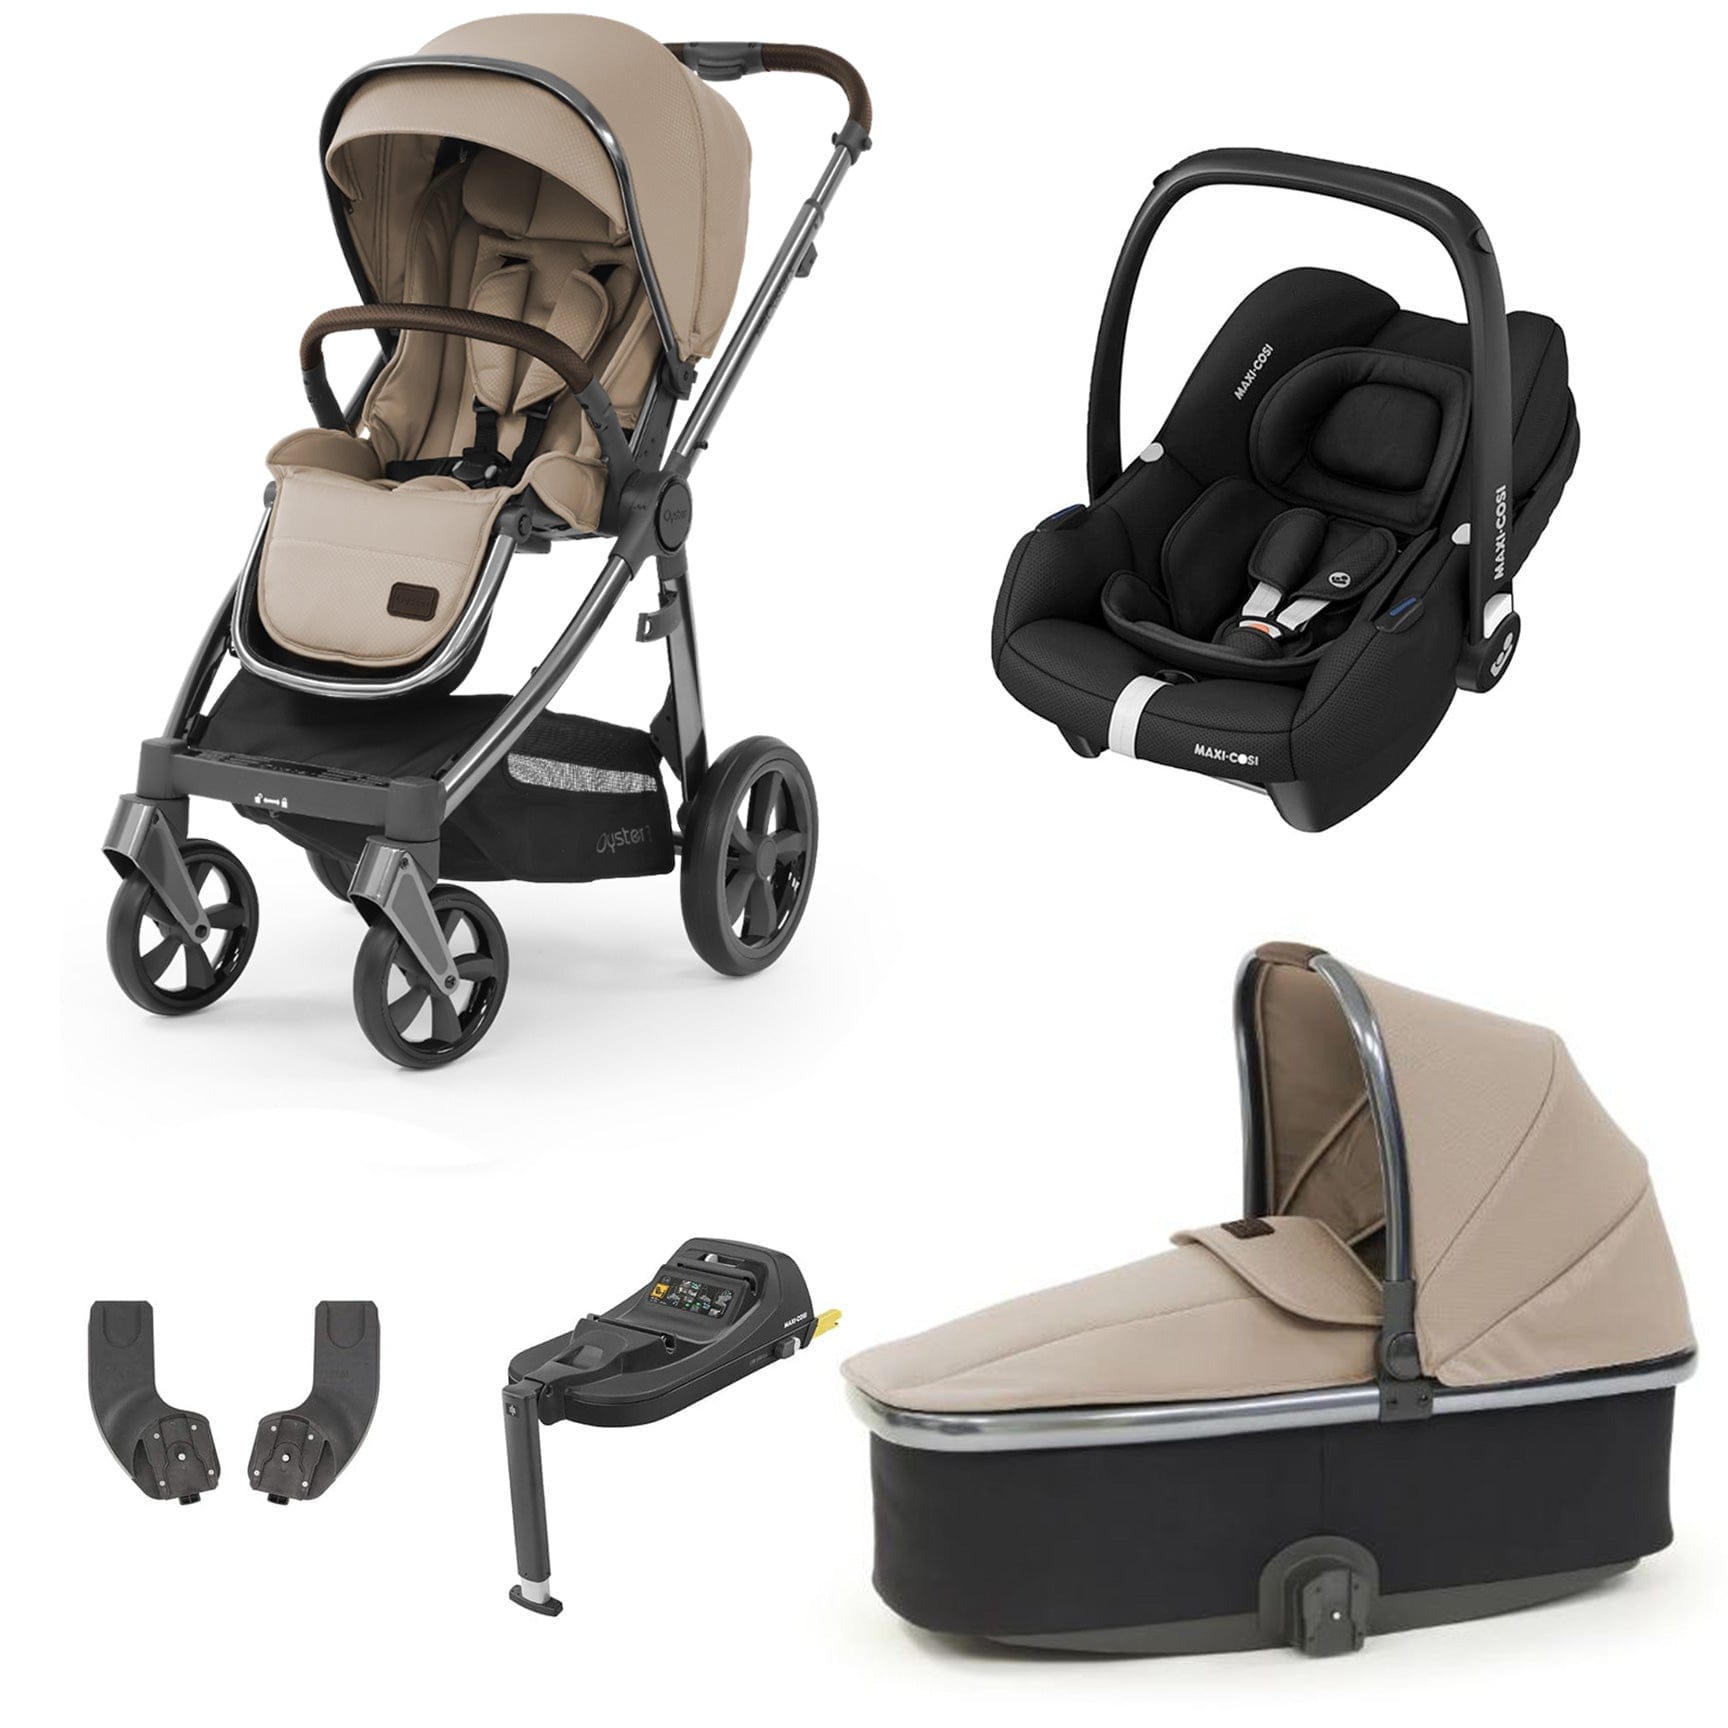 Babystyle Oyster 3 Essential Bundle with Car Seat in Butterscotch Travel Systems 9111-BTS-1 5060711564630